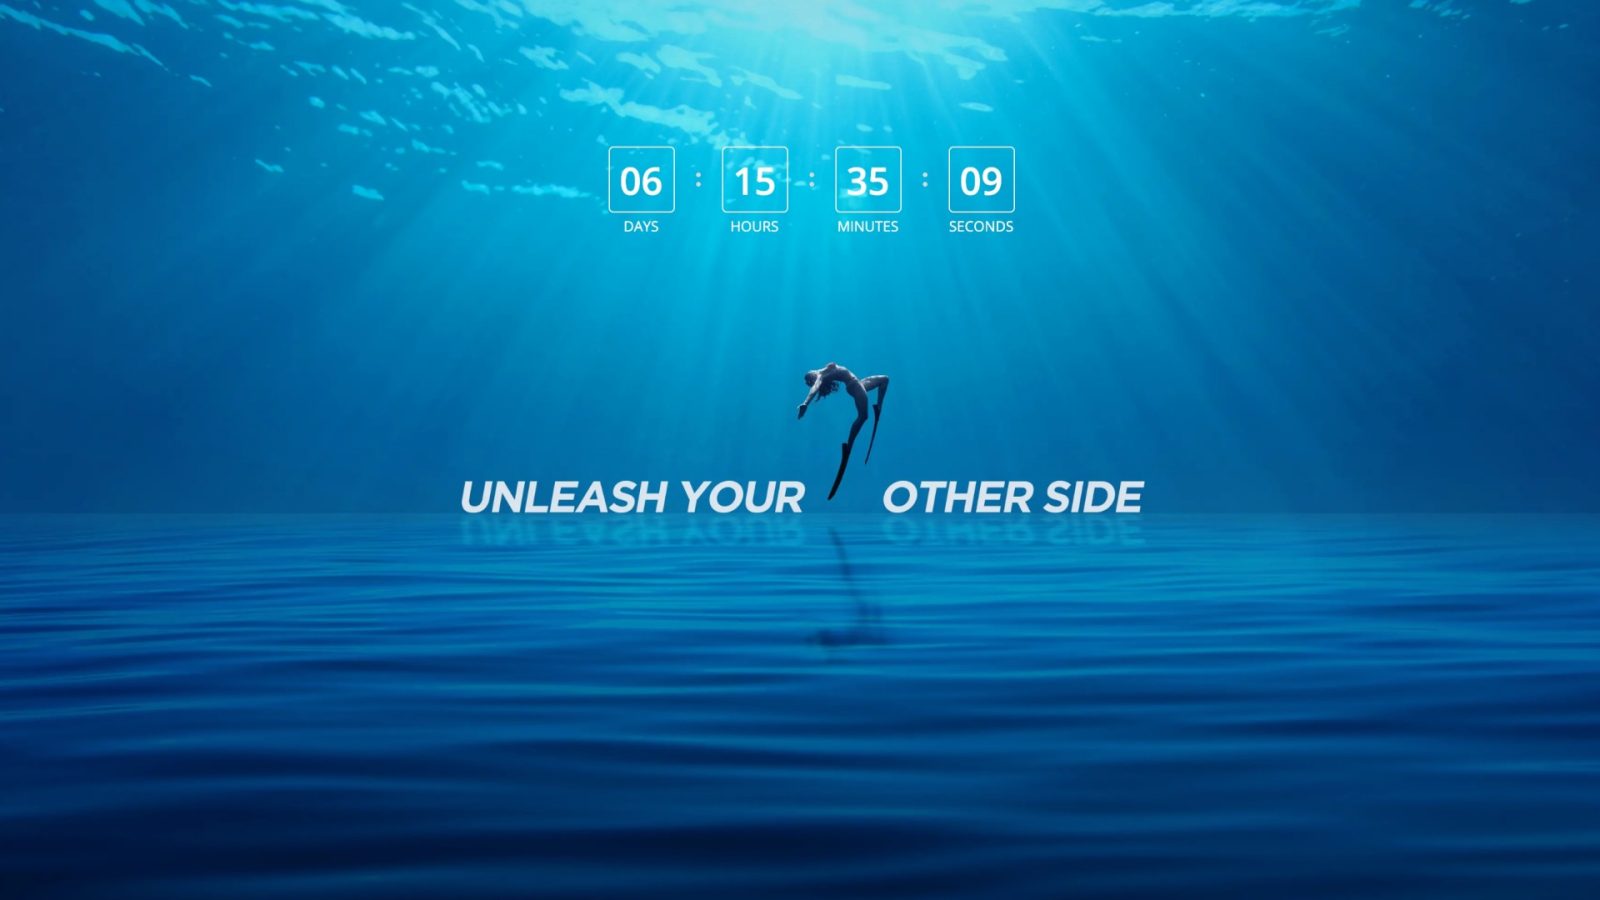 DJI announcement: “Unleash your other side” for May 15th